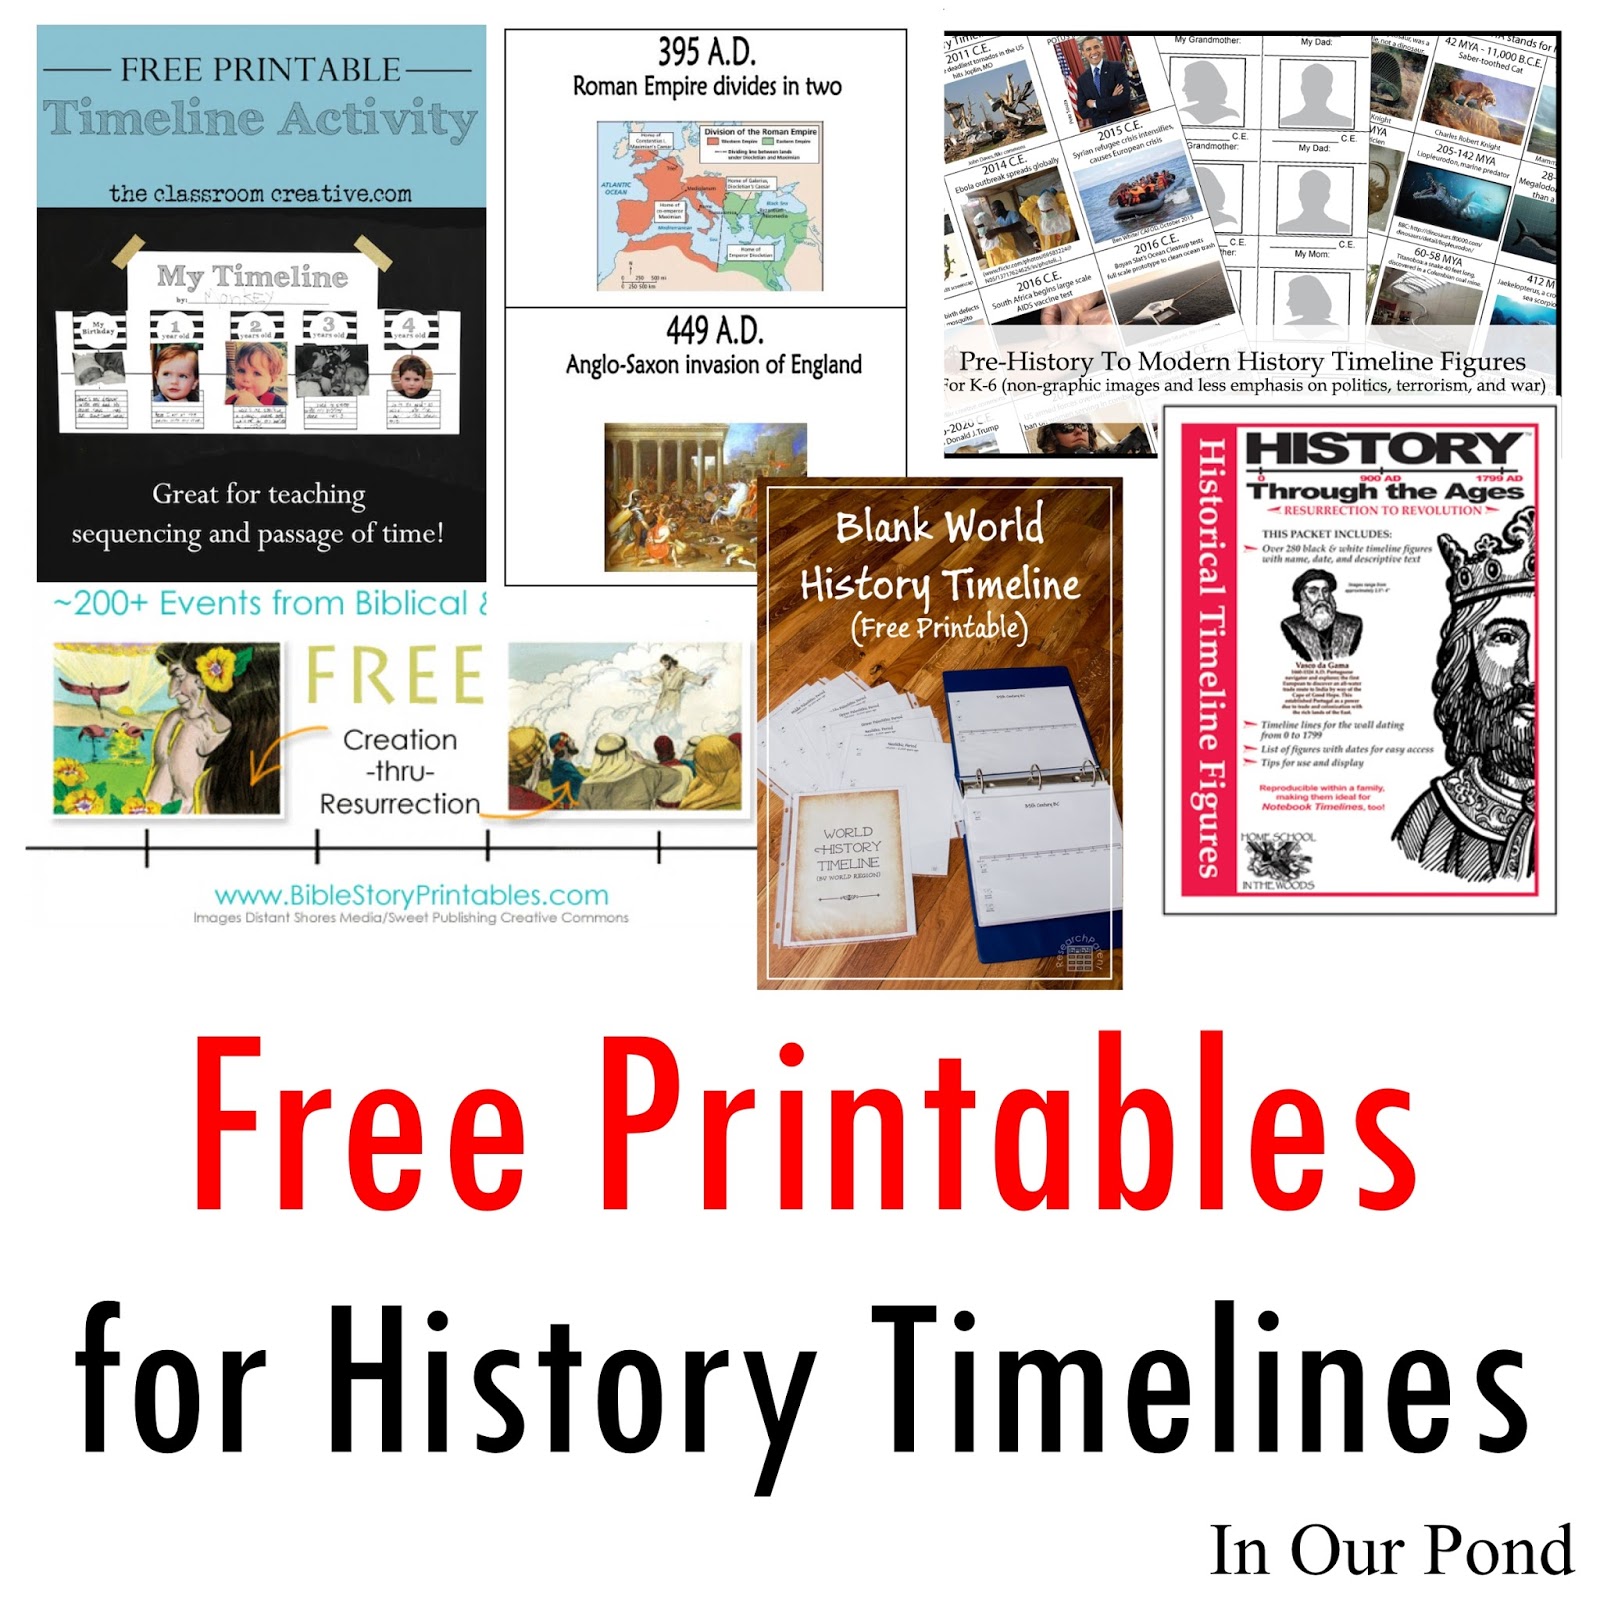 Free Printables for History Timelines - In Our Pond